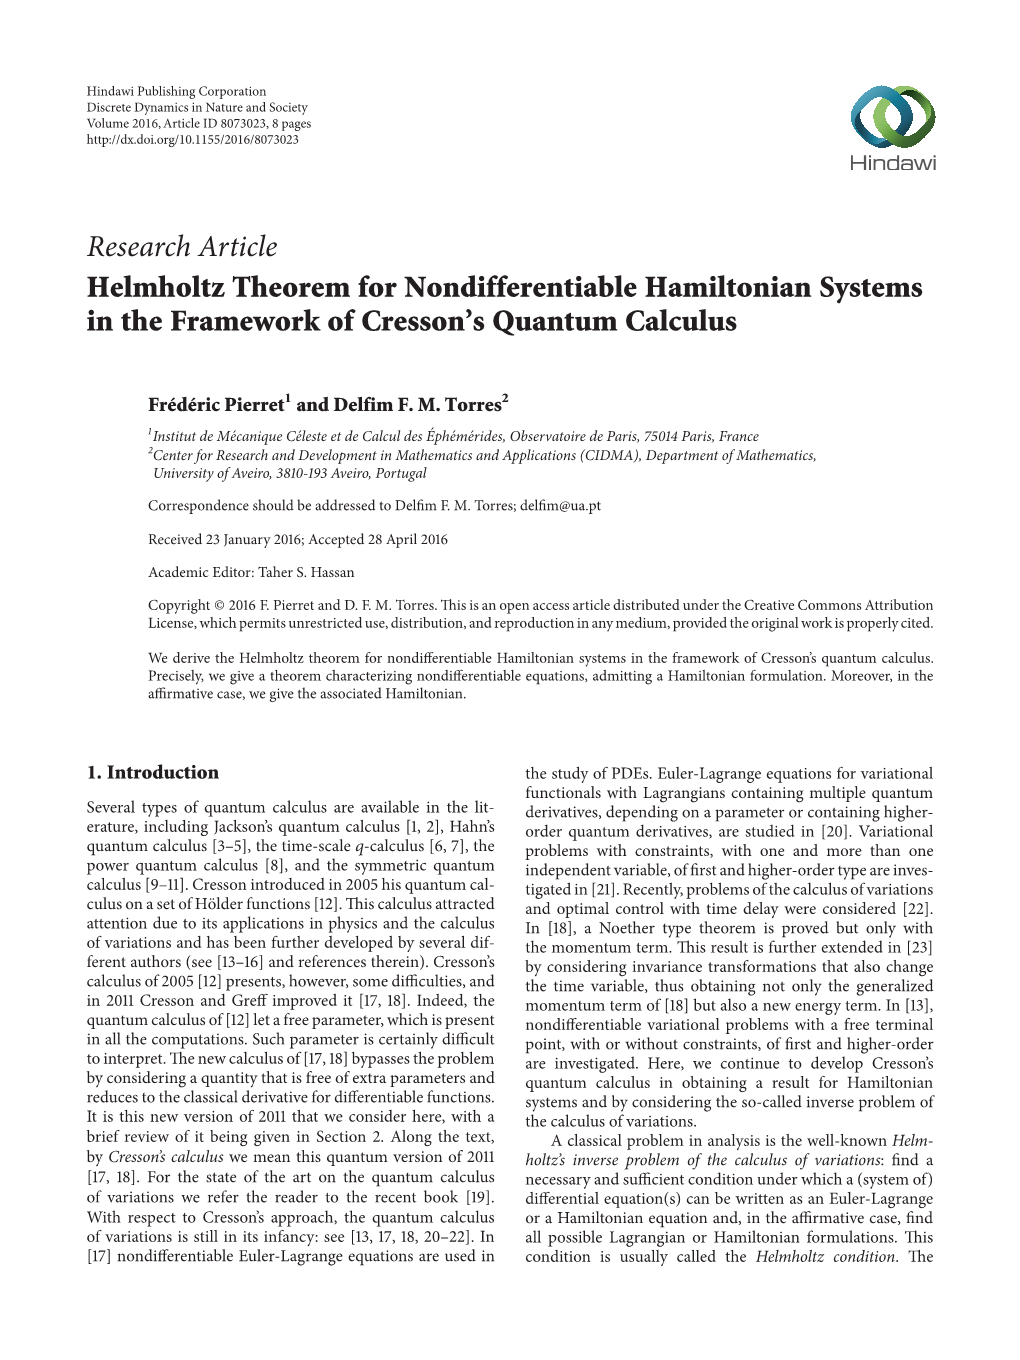 Research Article Helmholtz Theorem for Nondifferentiable Hamiltonian Systems in the Framework of Cresson’S Quantum Calculus